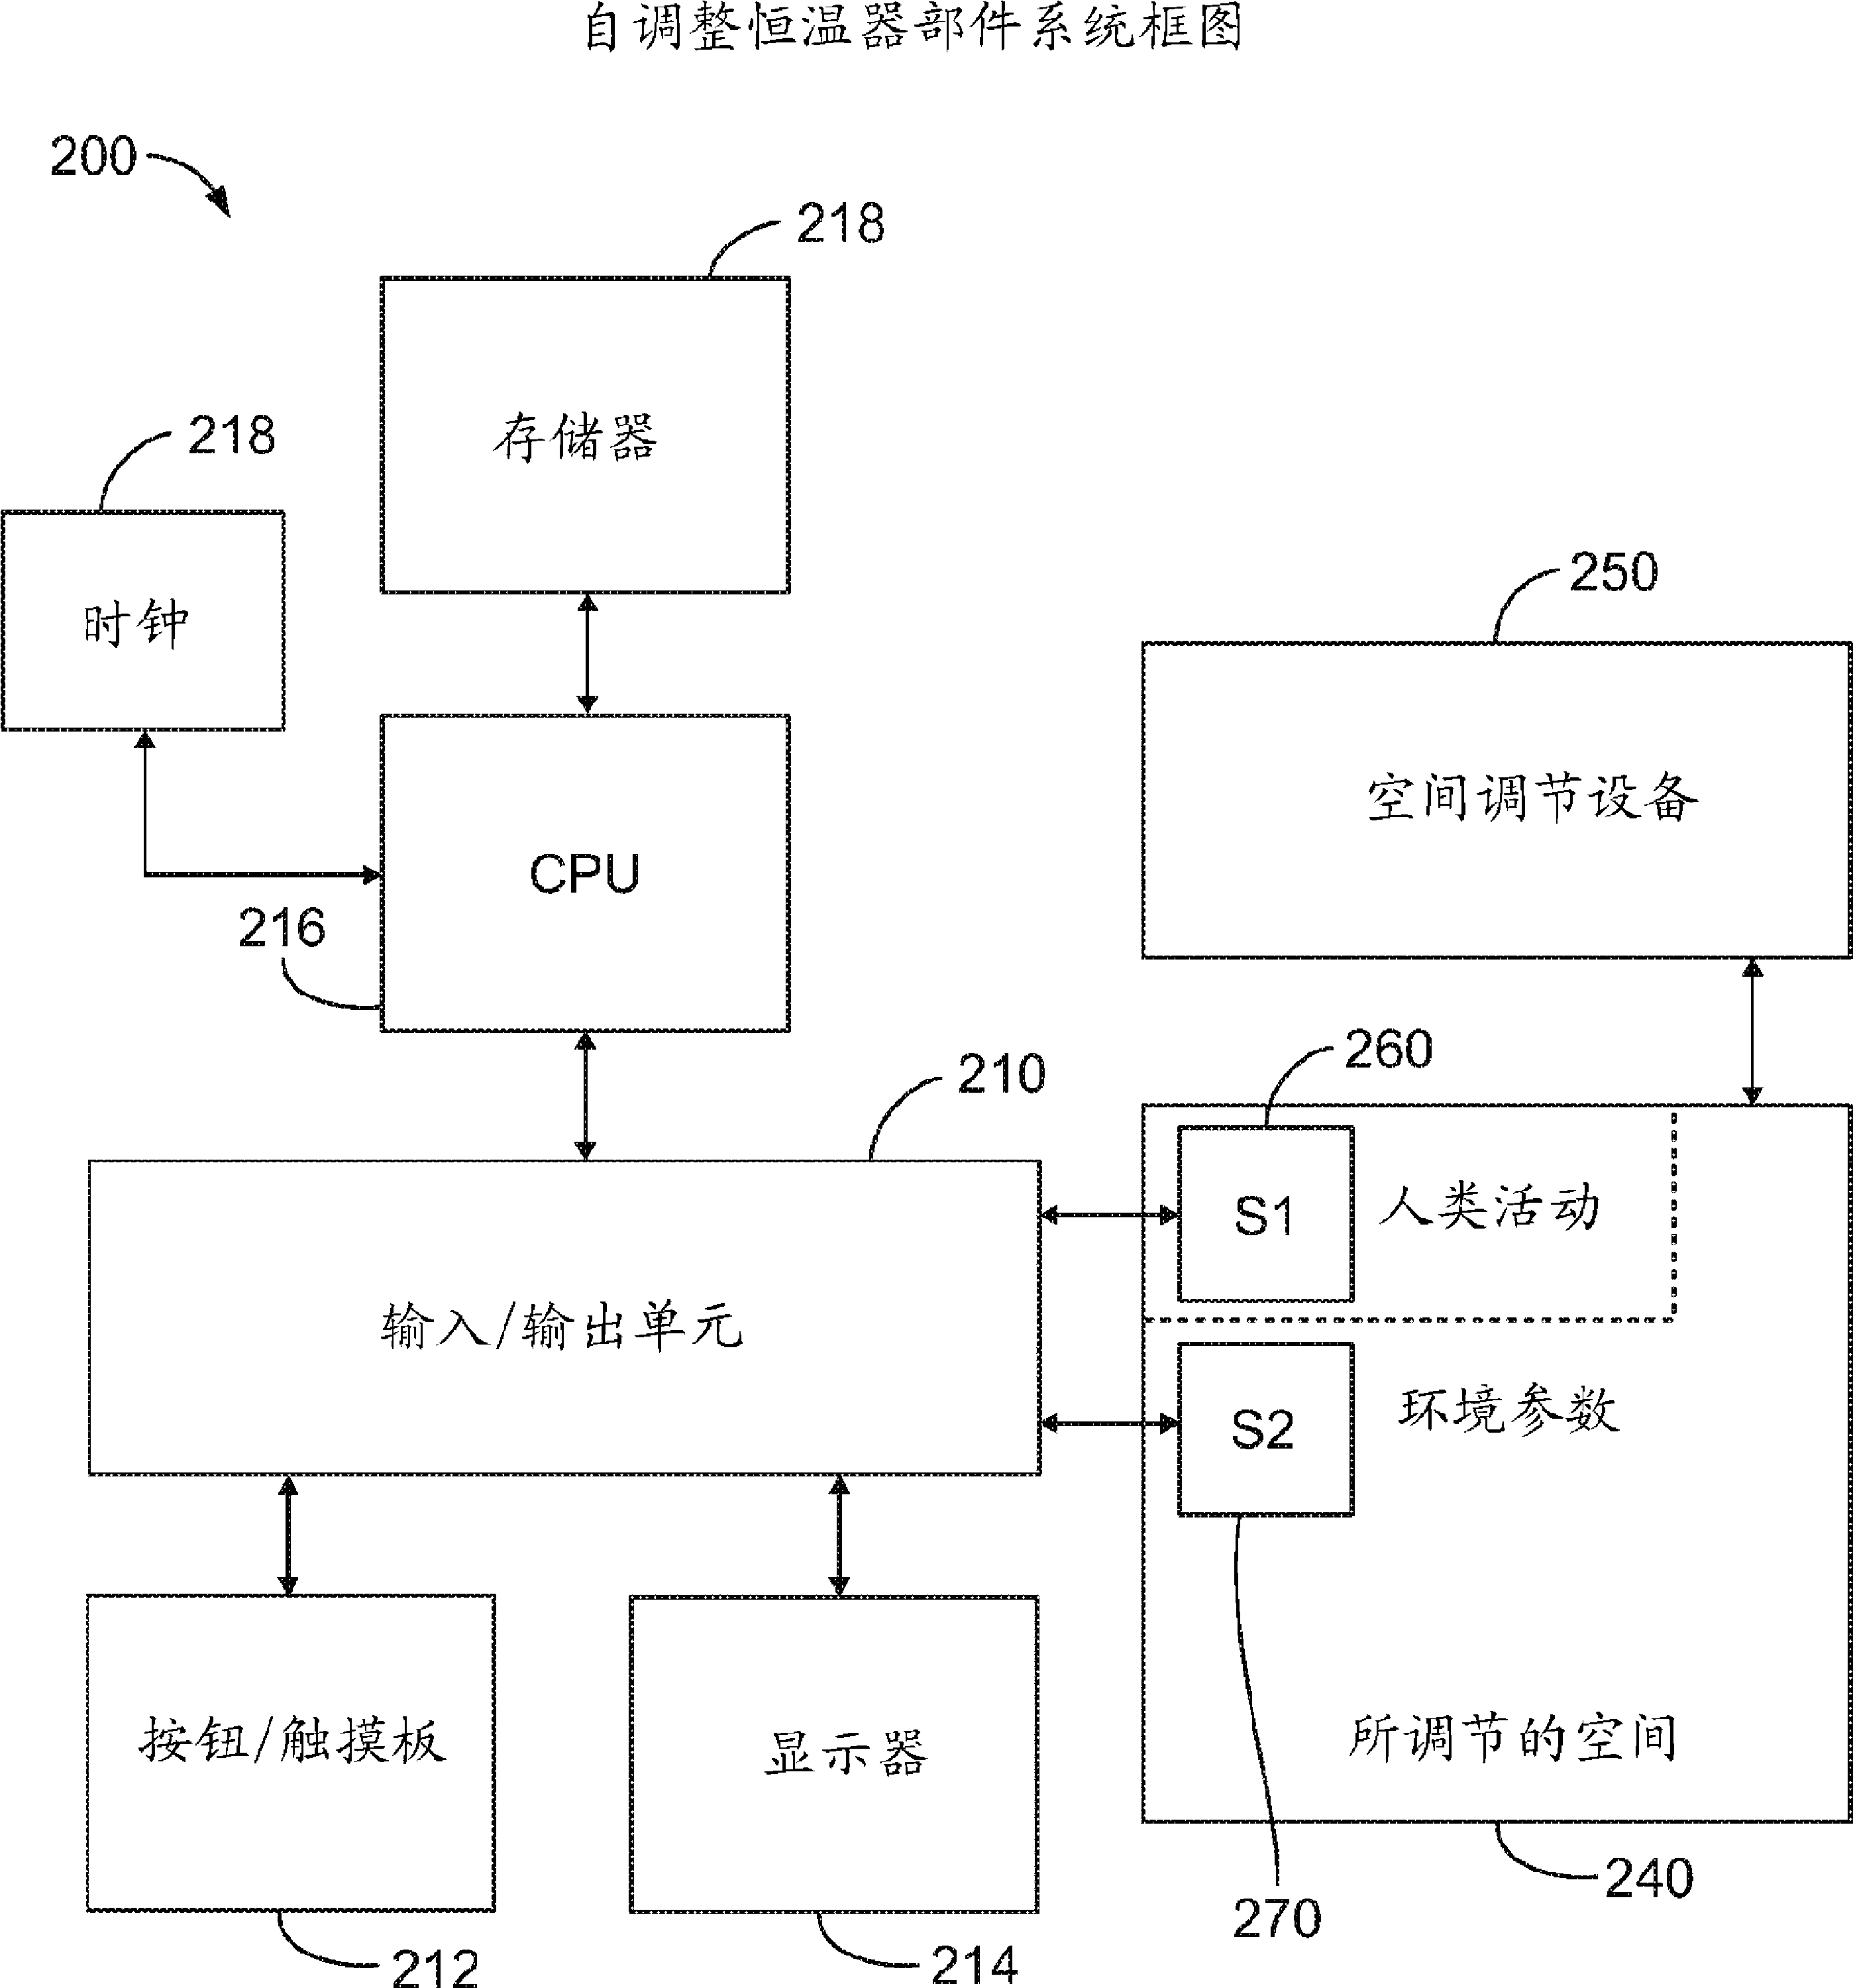 Self-adjusting thermostat for floor warming control systems and other applications